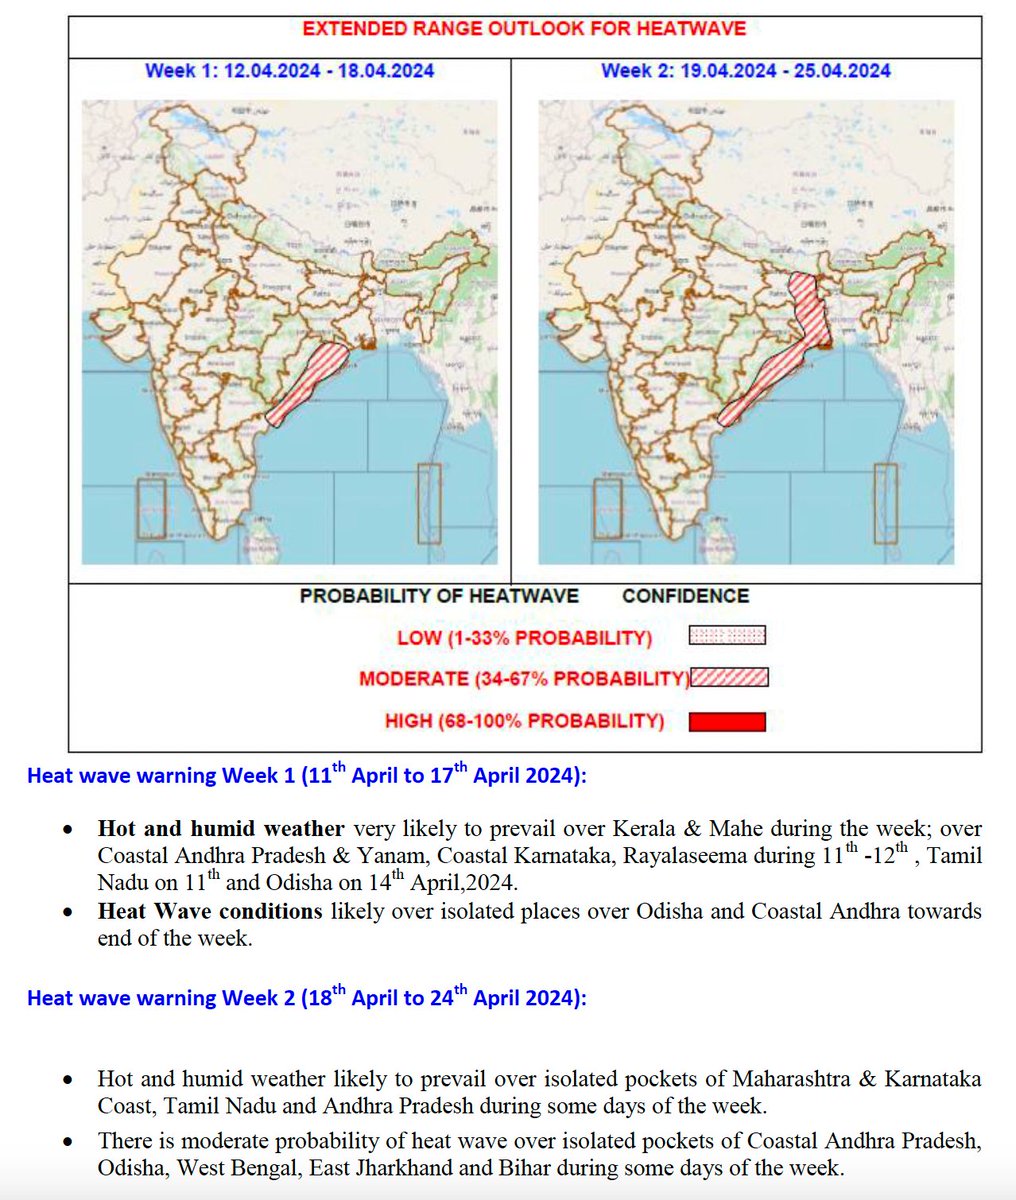 Which Parliamentary Constituencies/Districts could have polling during heatwaves as per this extended range #Heatwave forecast for next two weeks (12-25 April) issued by @Indiametdept? Authorities should keep watch on heatwave forecasts to #BeatTheHeat during #LokSabaElection2024